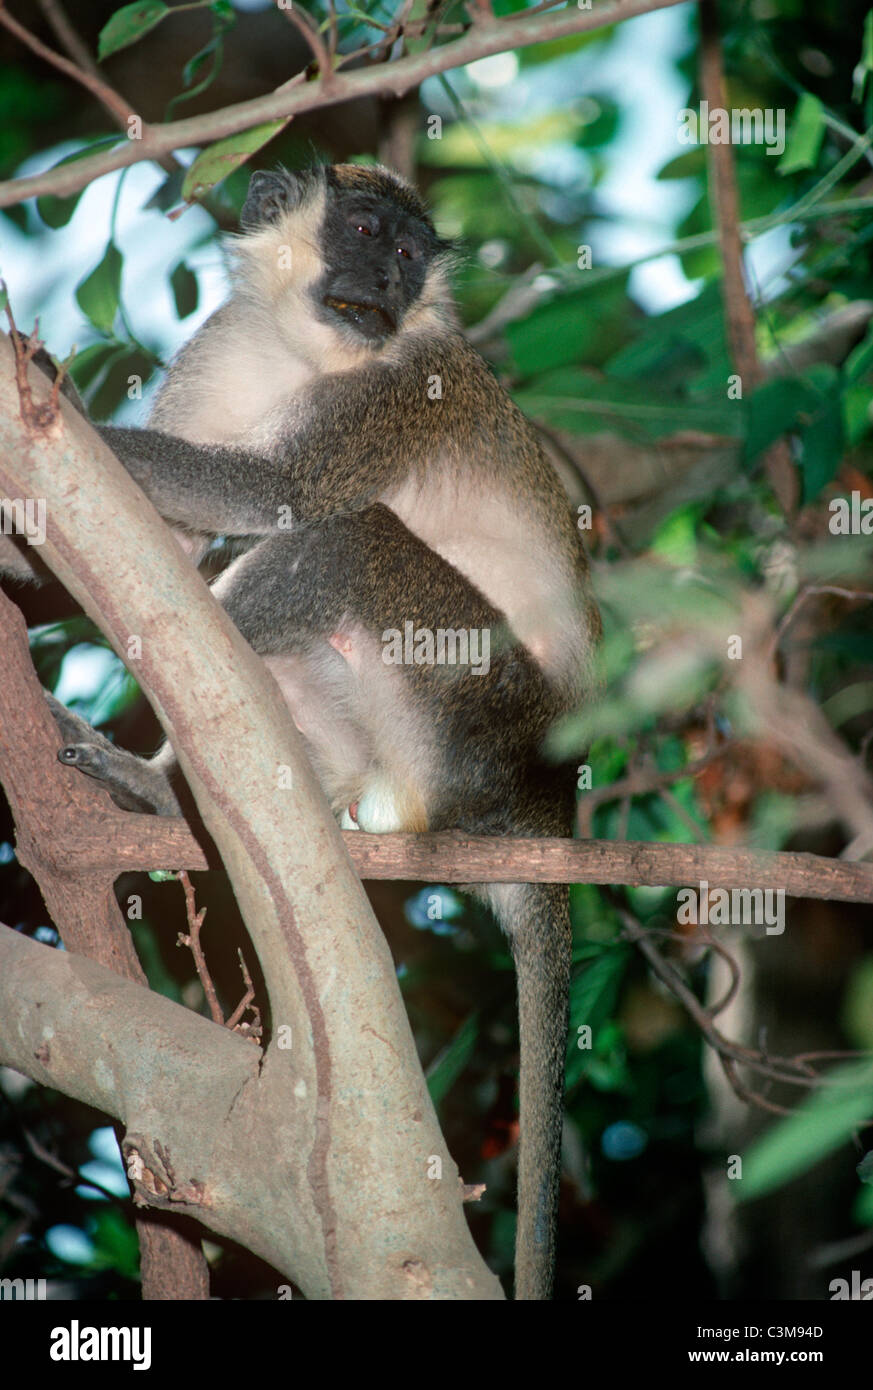 Green monkey or callithrix (Cercopithecus aethiops sabaeus: Cercopithecidae) in gallery forest, Gambia Stock Photo